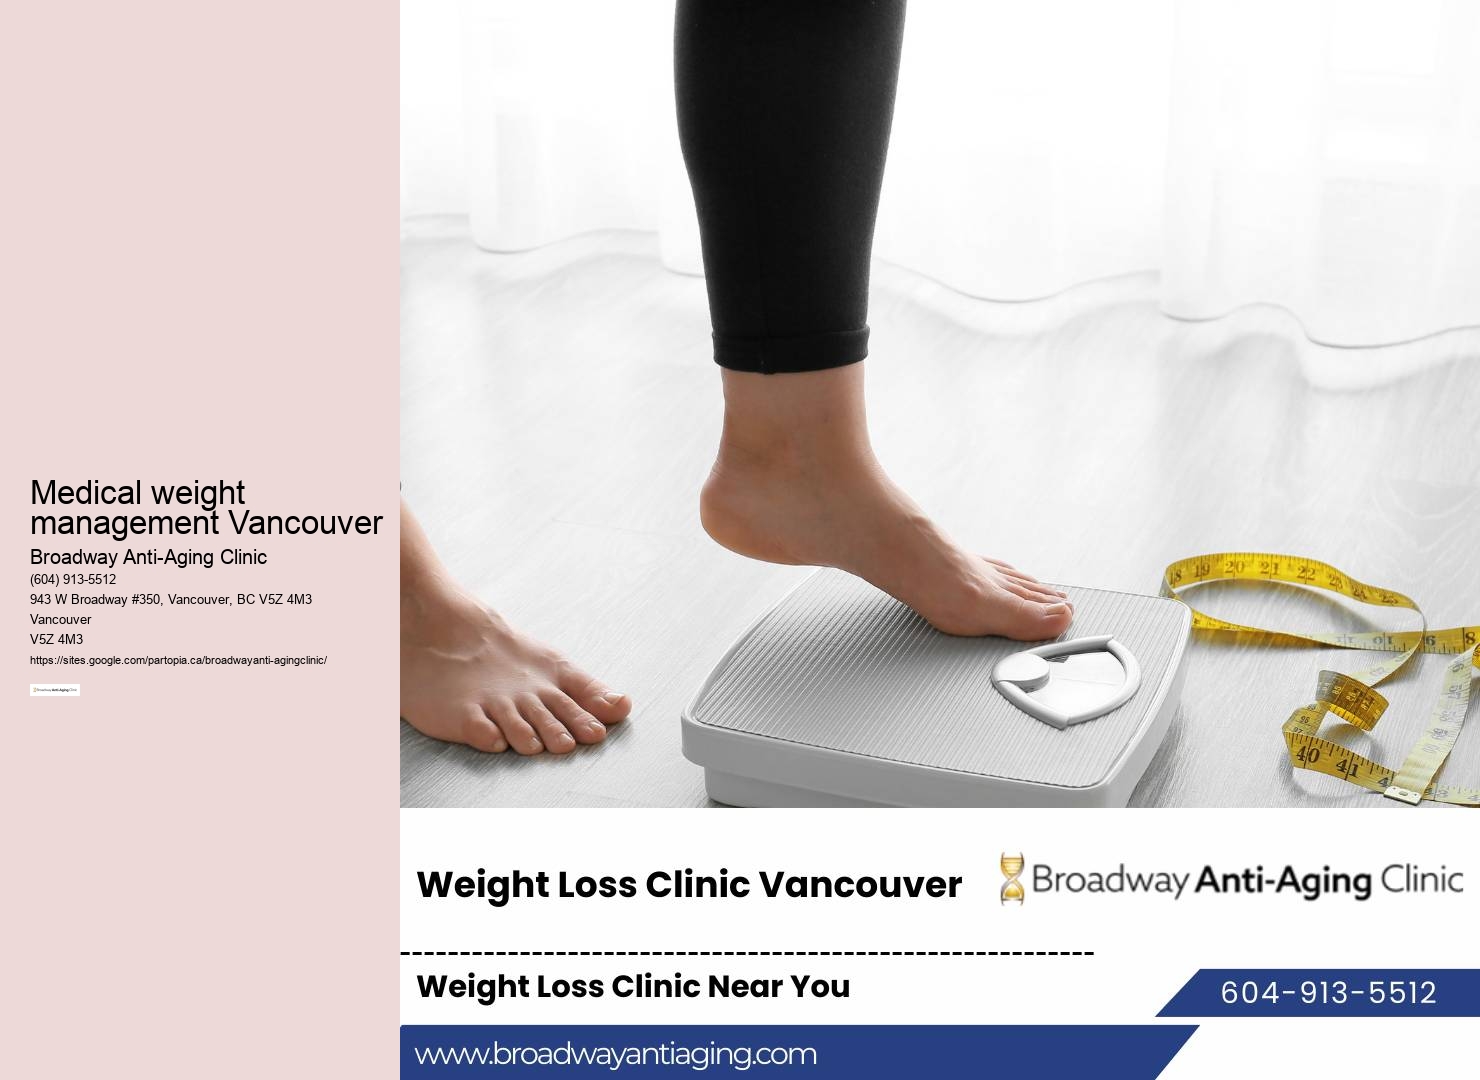 Nearby Lose Weight Clinics Near Me